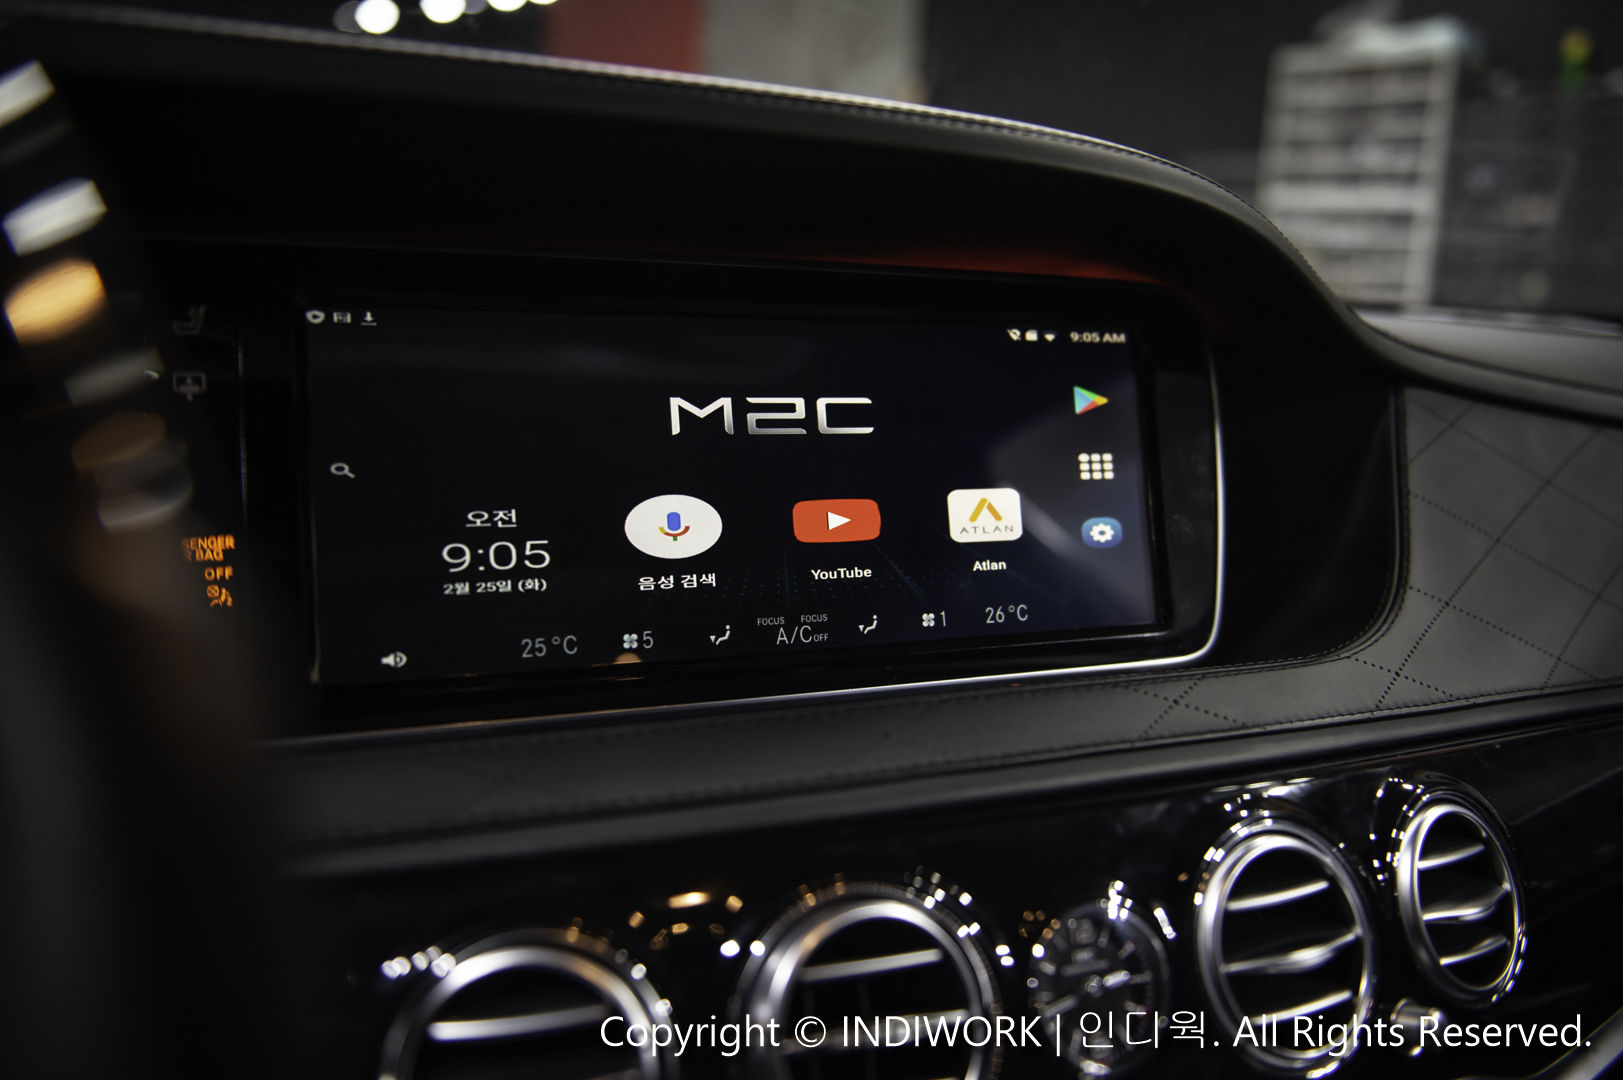 Android PC with Touch Control for 2016 Mercedes Maybach W222 "M2C-200A"